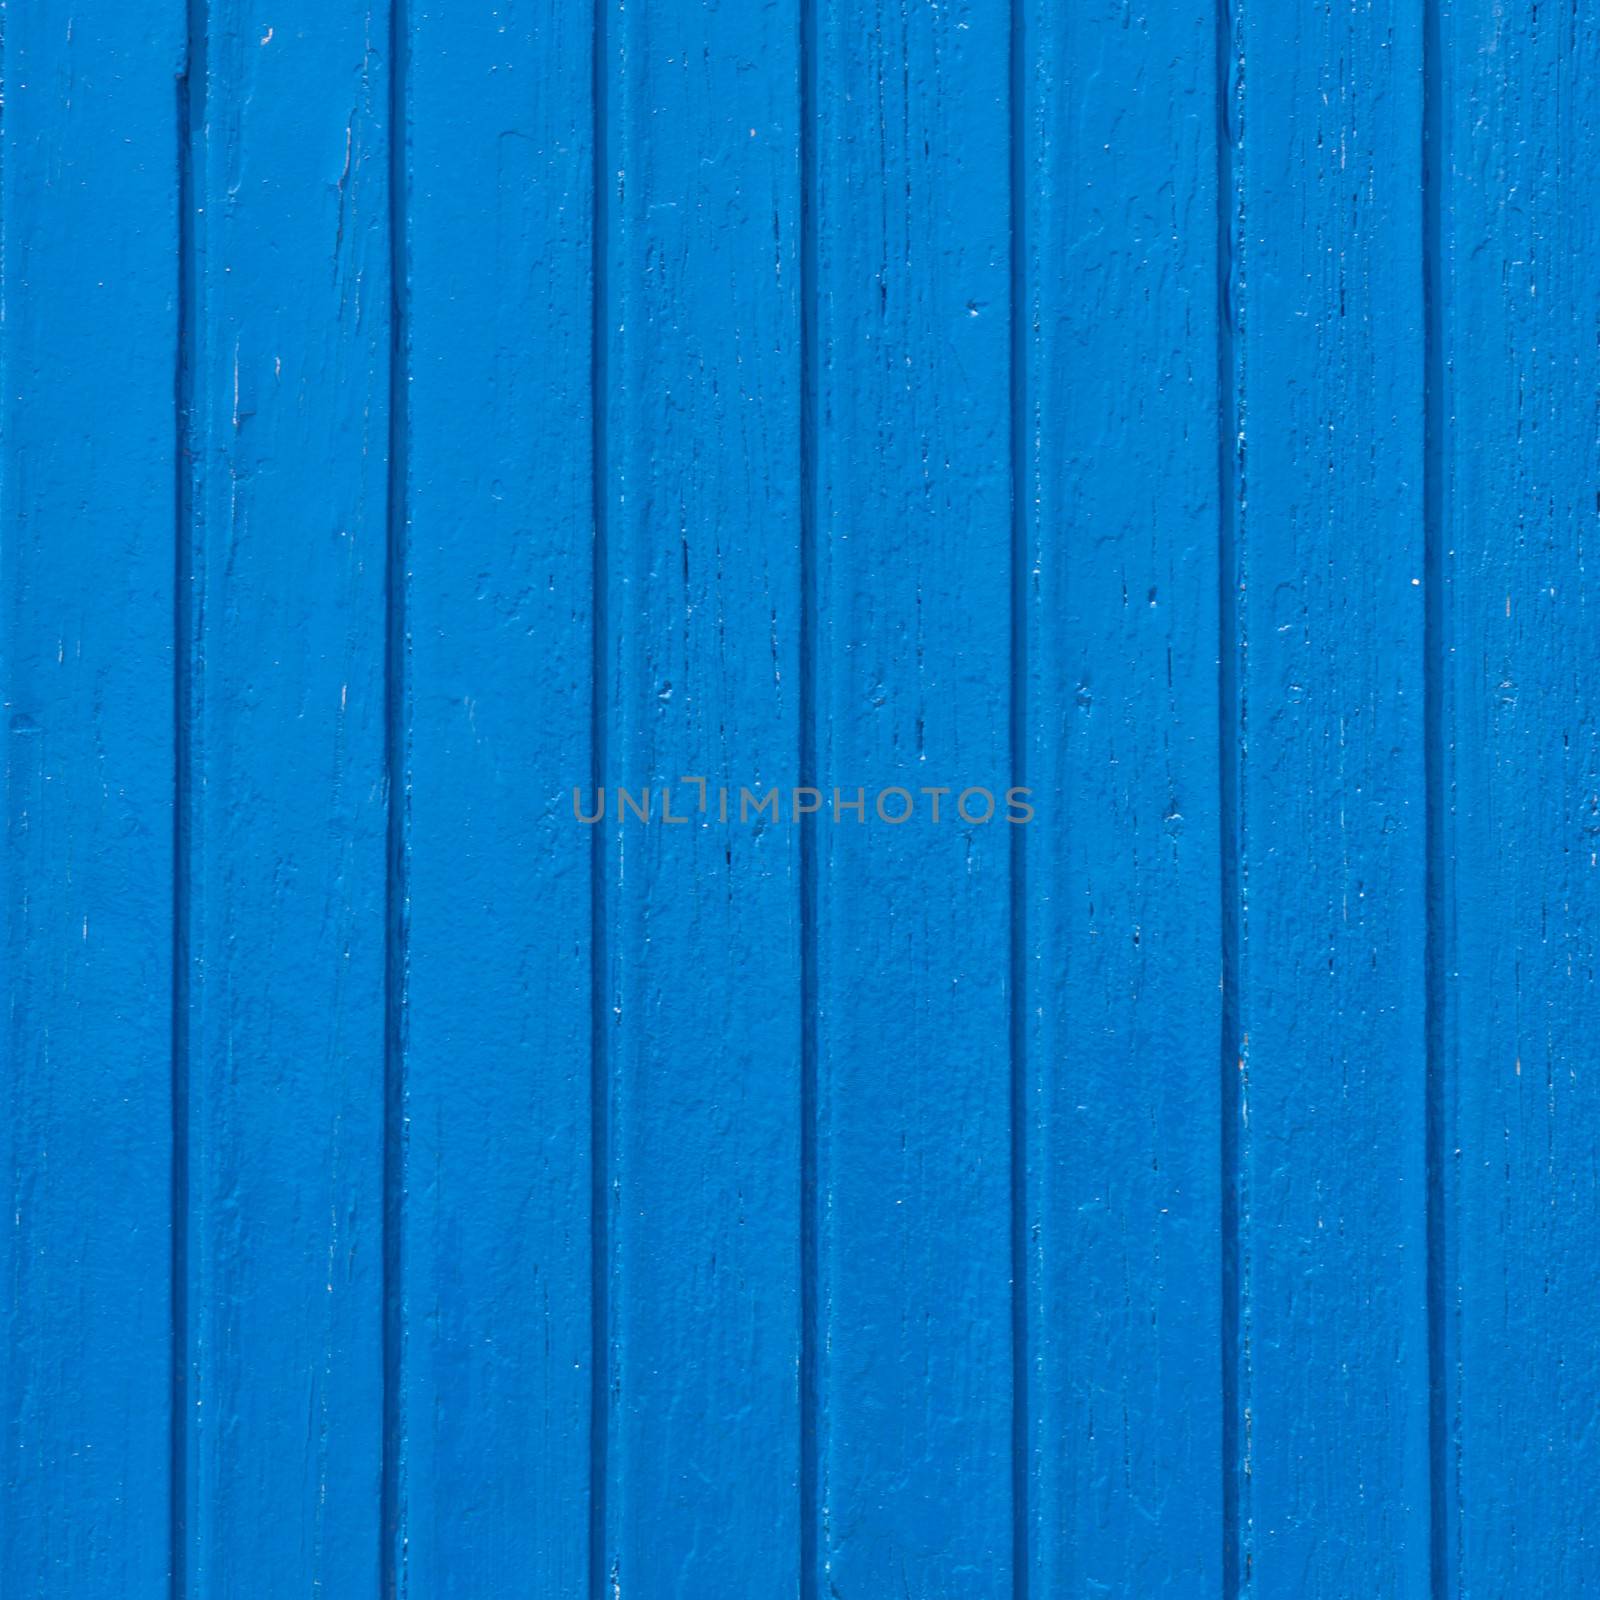 Aged grunge weathered blue wooden window shutter. Can be used as a Mediterranean background.